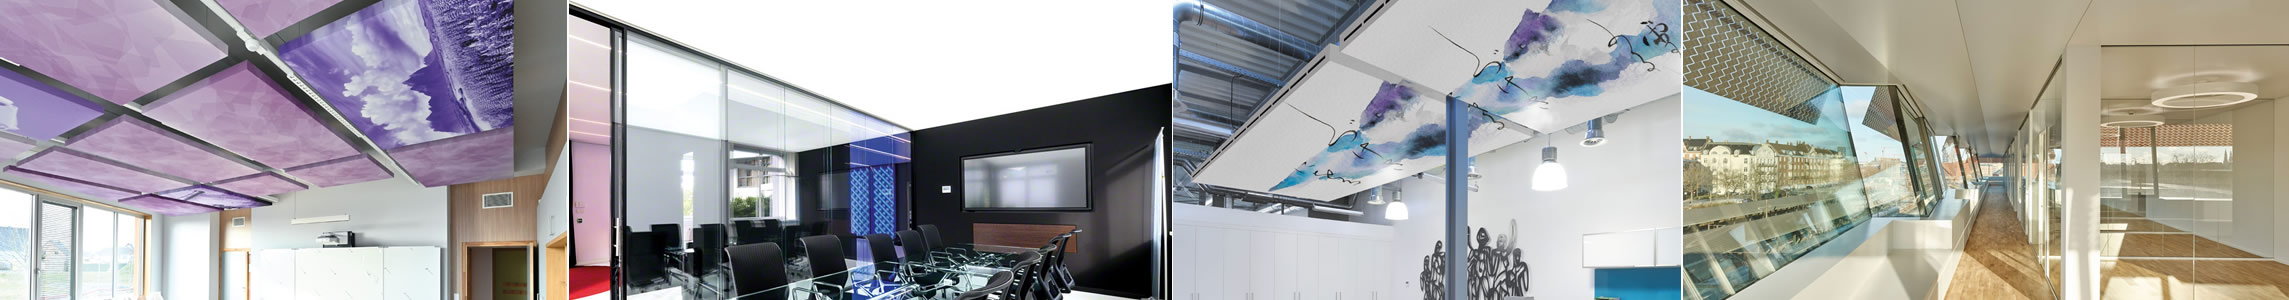 Invisible airconditioning and heating system via ceilings